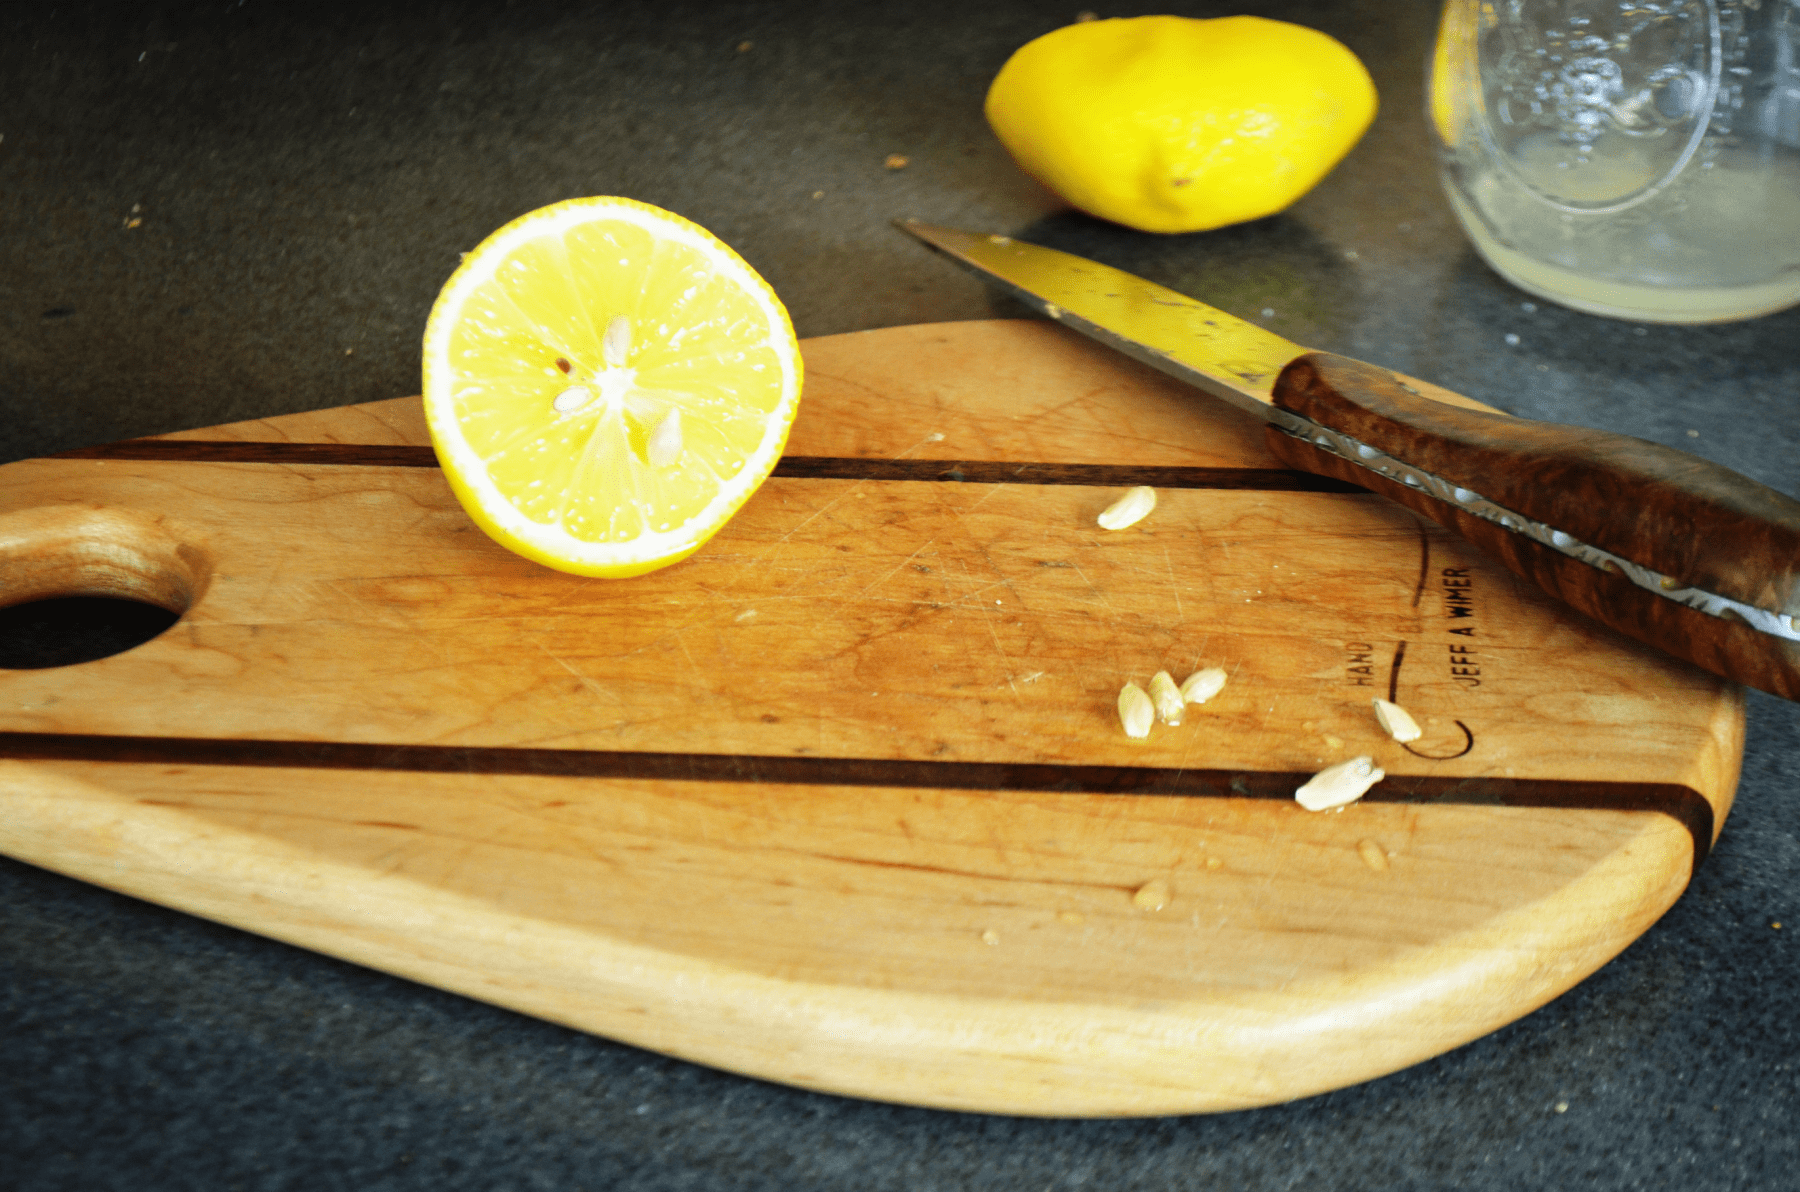 A-lemon-sliced-in-half-sits-with-a-wood-handled-knife-and-several-seeds-on-a-wooden-cutting-board.-Behind-the-board-sits-a-squished-squeezed-lemon-next-to-a-jar-with-lemon-juice.